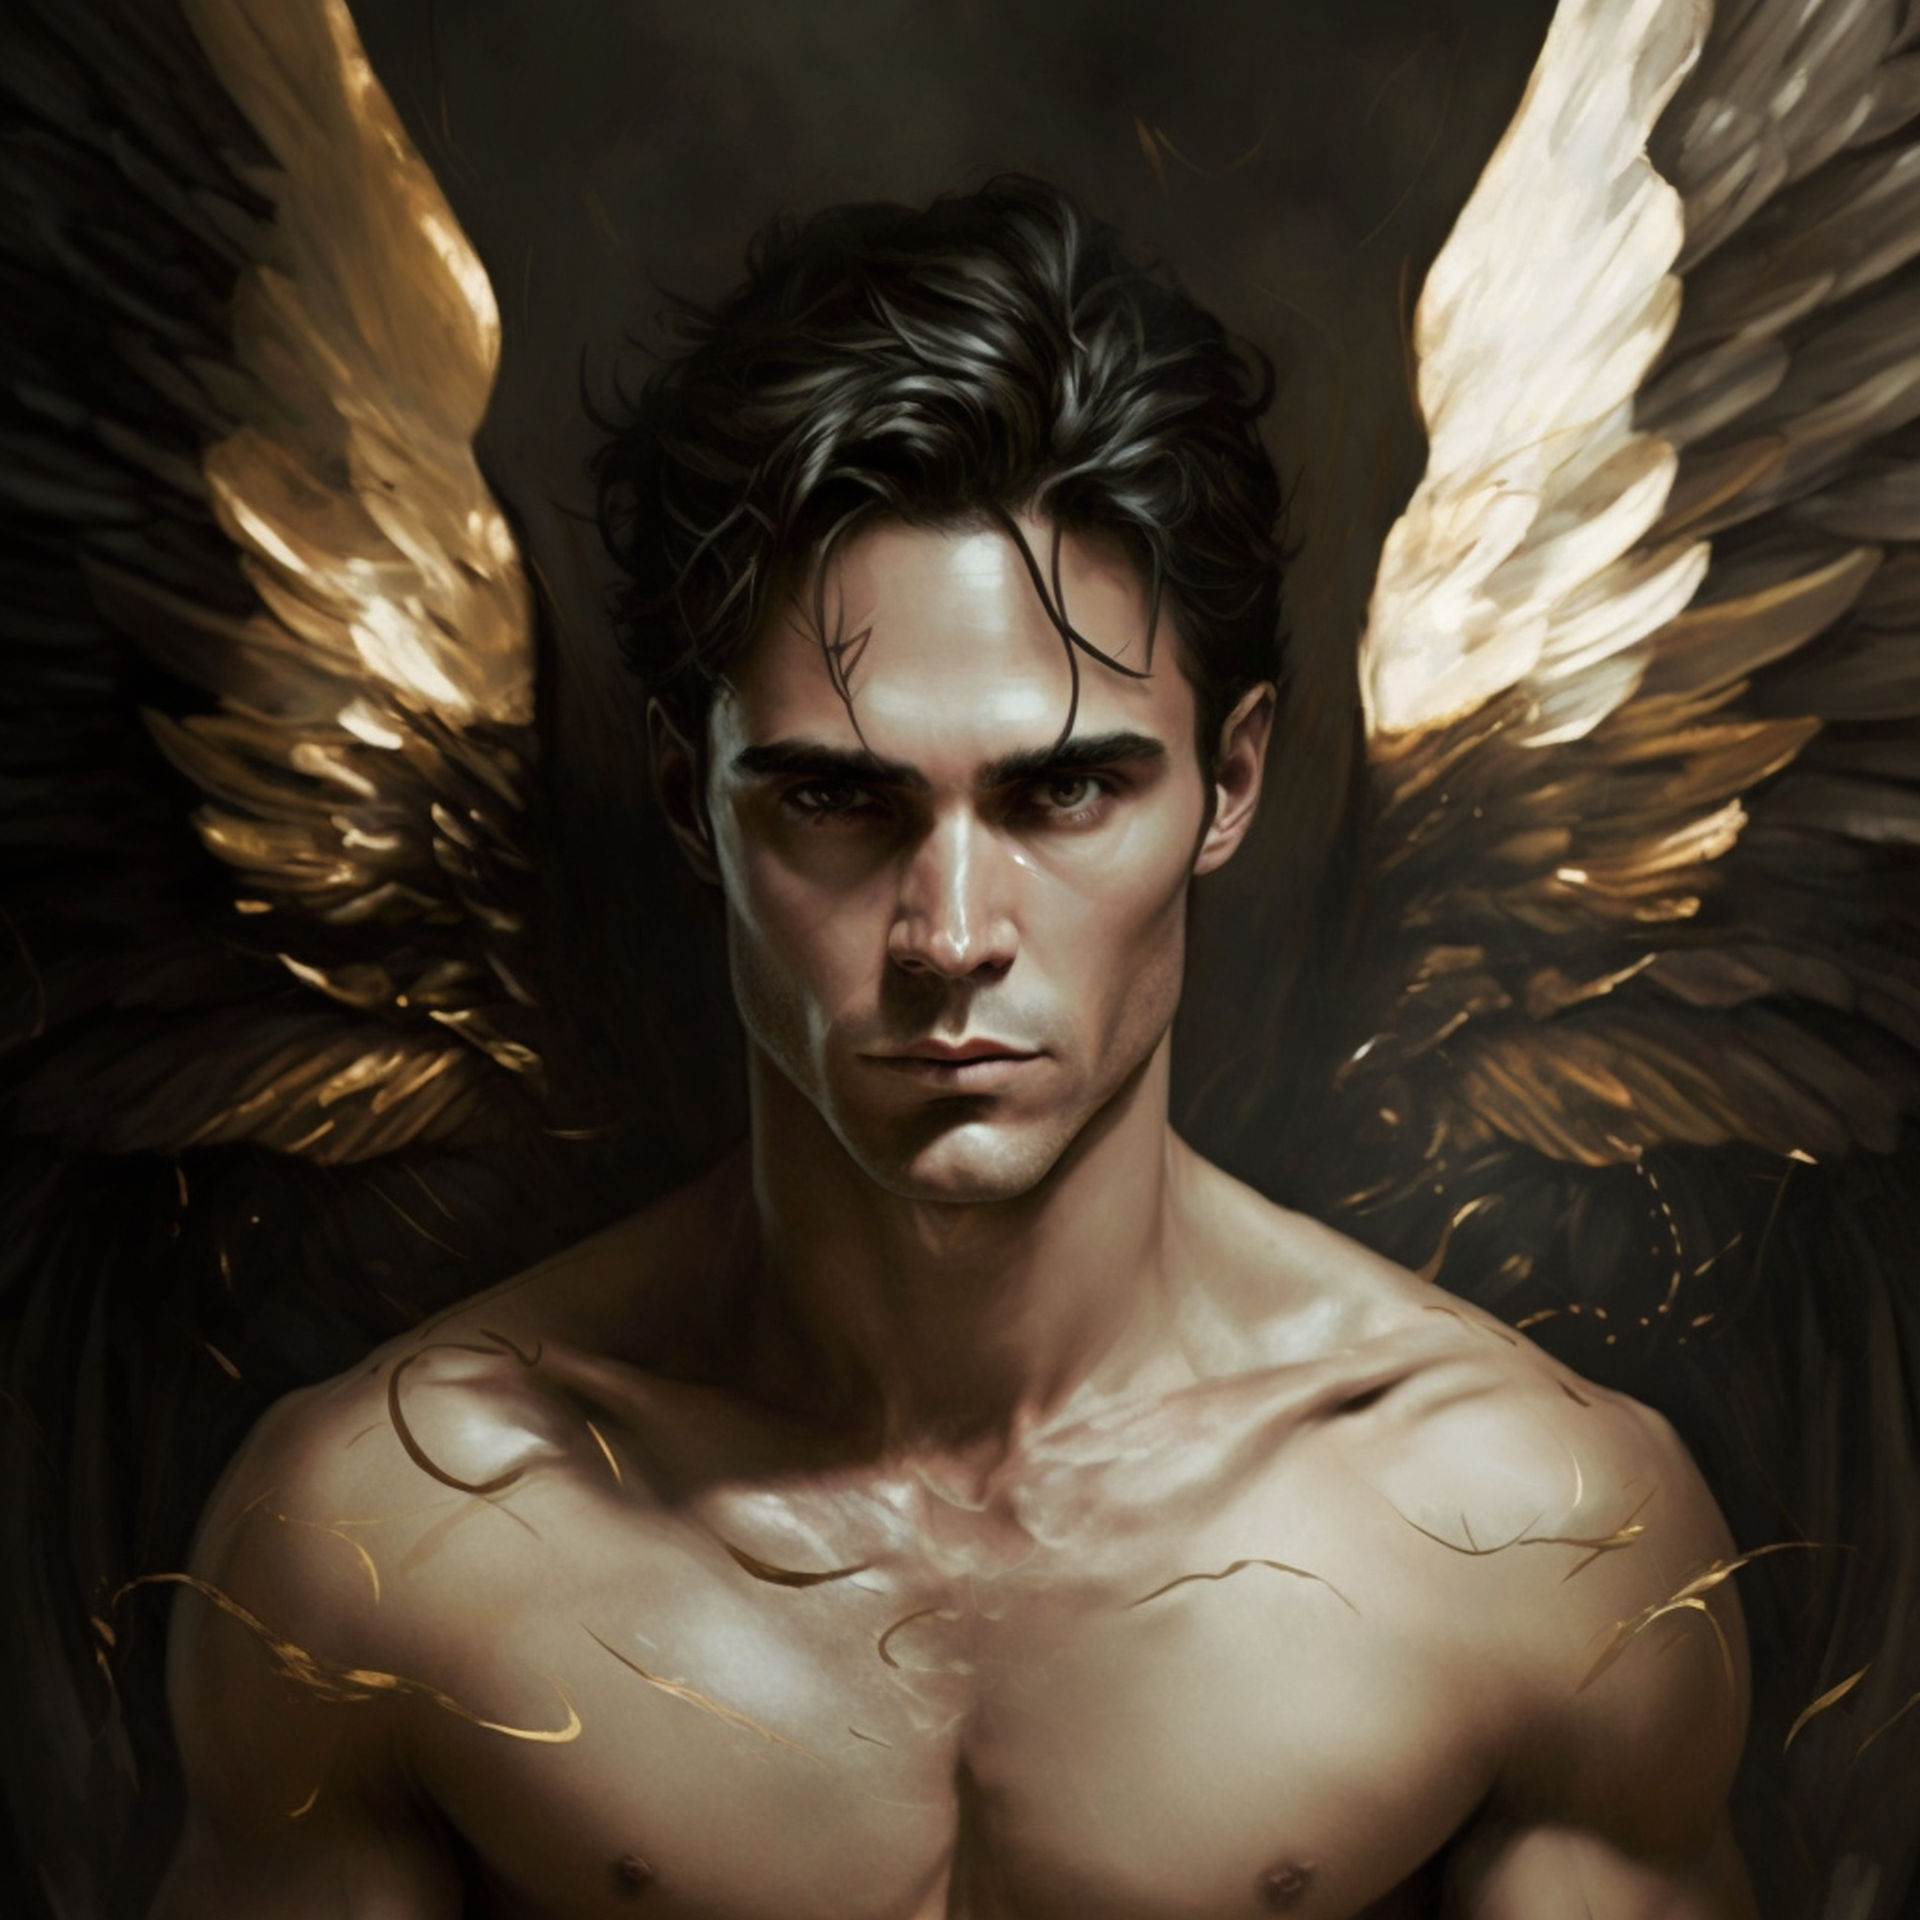 Lucifer, The Fallen Angel by LadyNuggets on DeviantArt